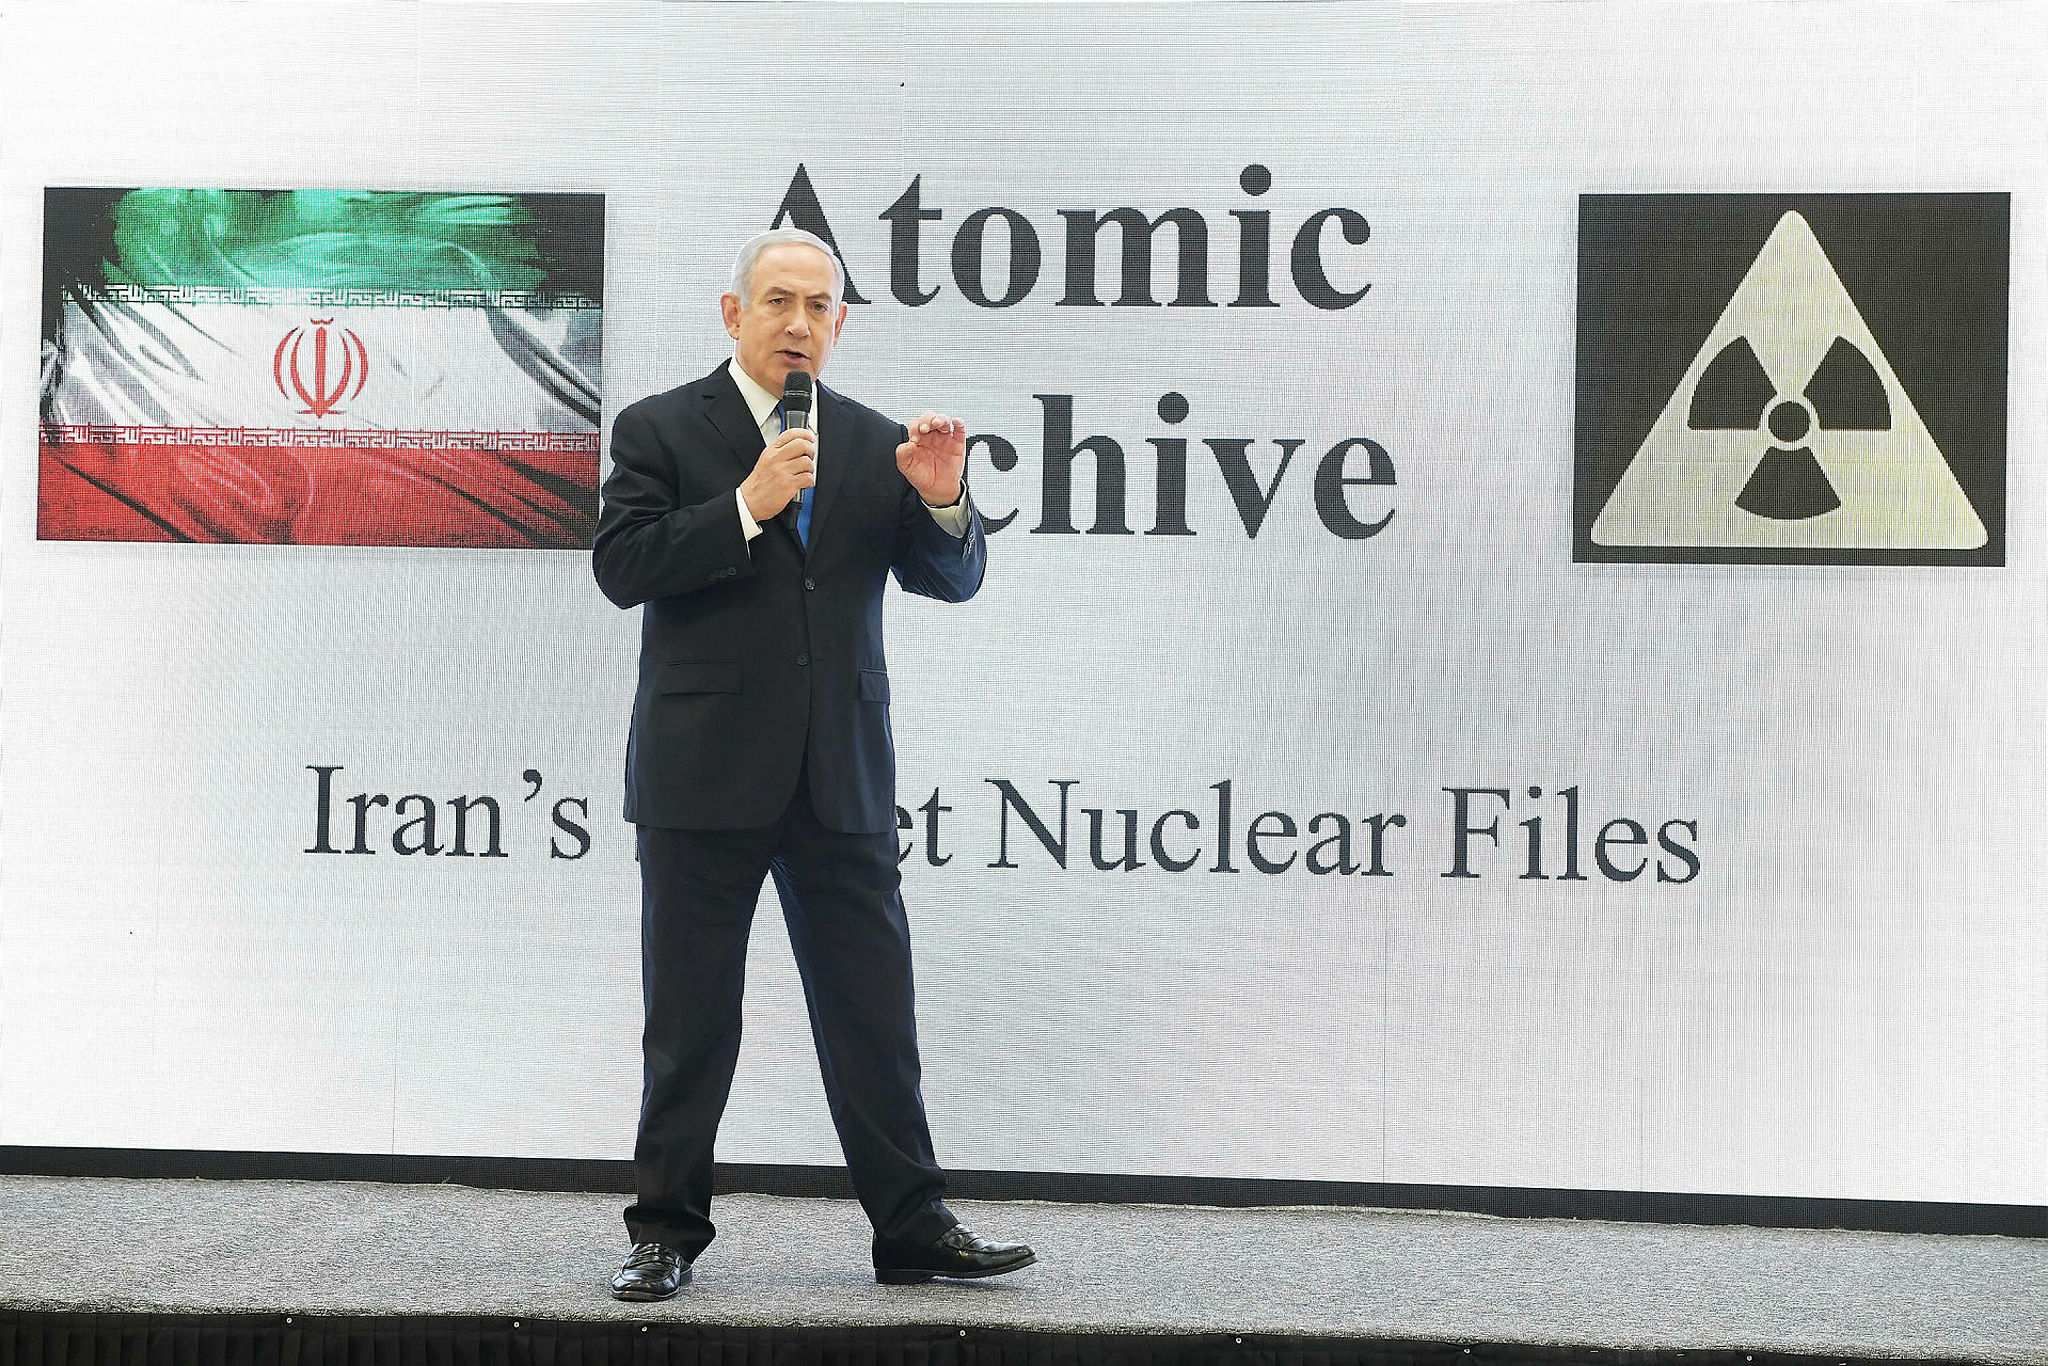 Netanyahu at a Press Conference on the Iranian Nuclear Program